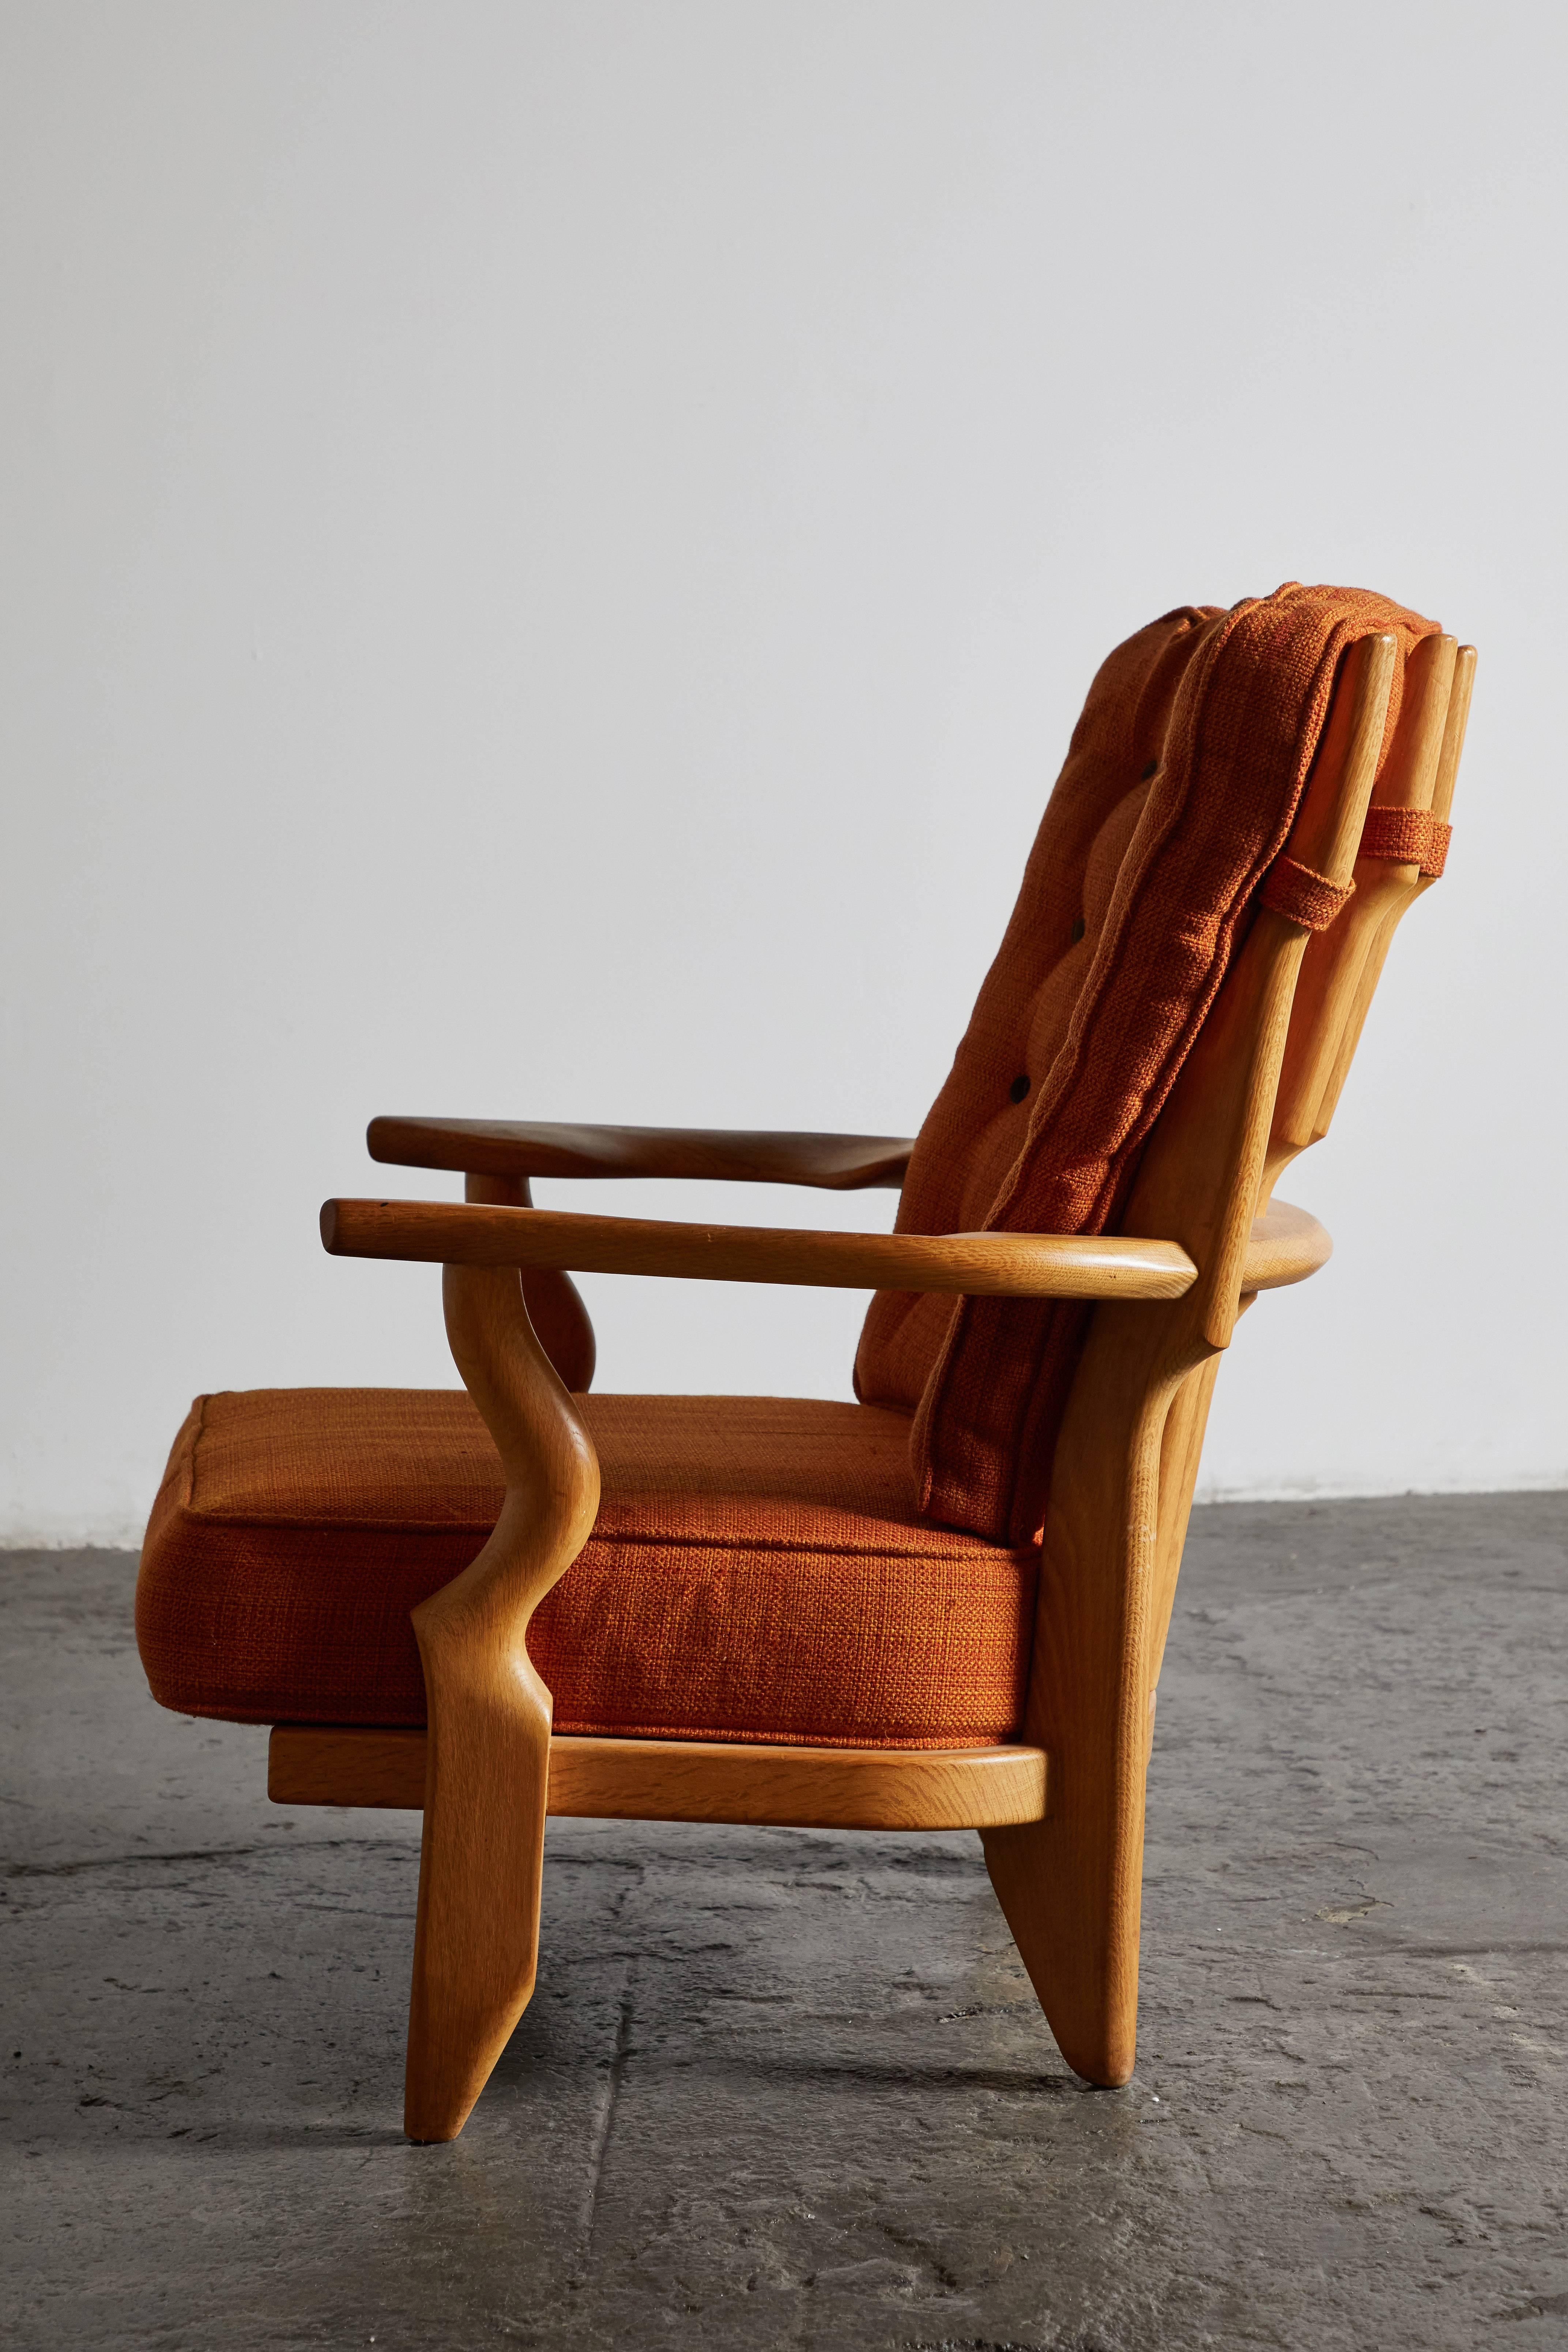 Sculptural Wood Lounge Chair by Guillerme et Chambron 1